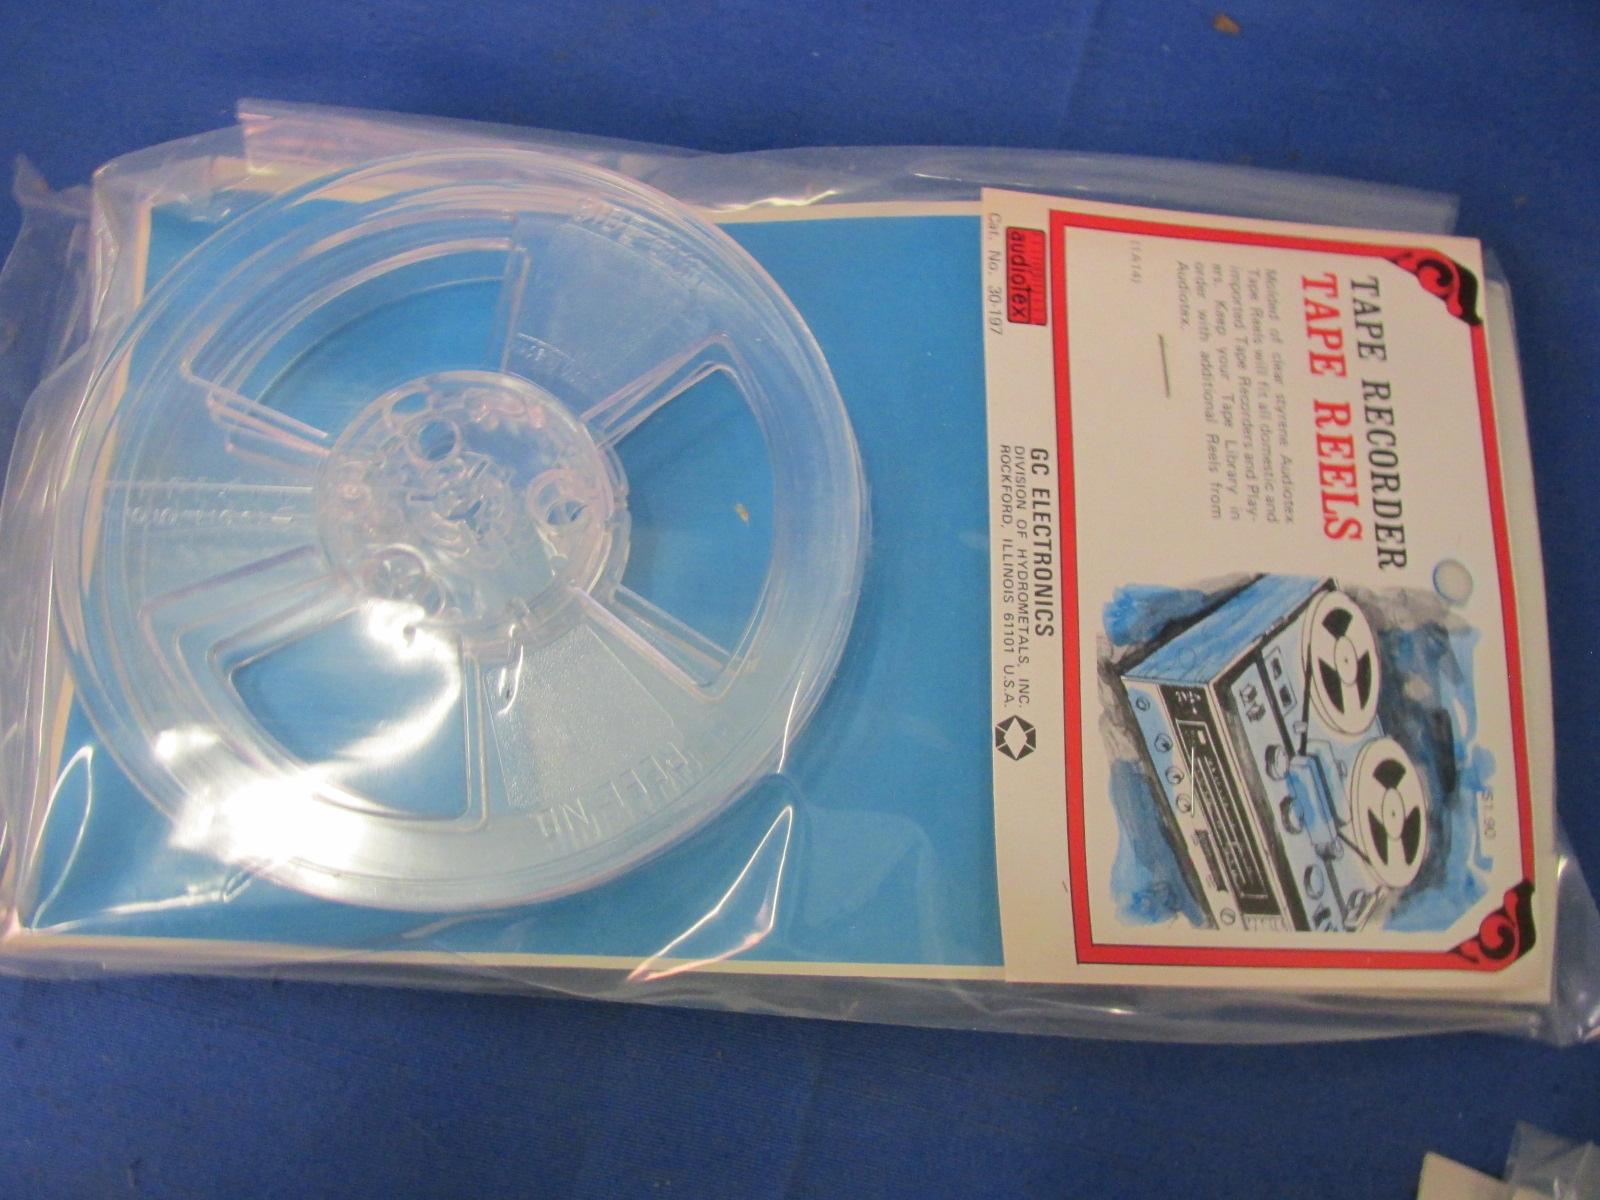 Ampex Reel To Reel Tape Recorder In Wheeled Cart - Tagged Mayo Clinic Property -